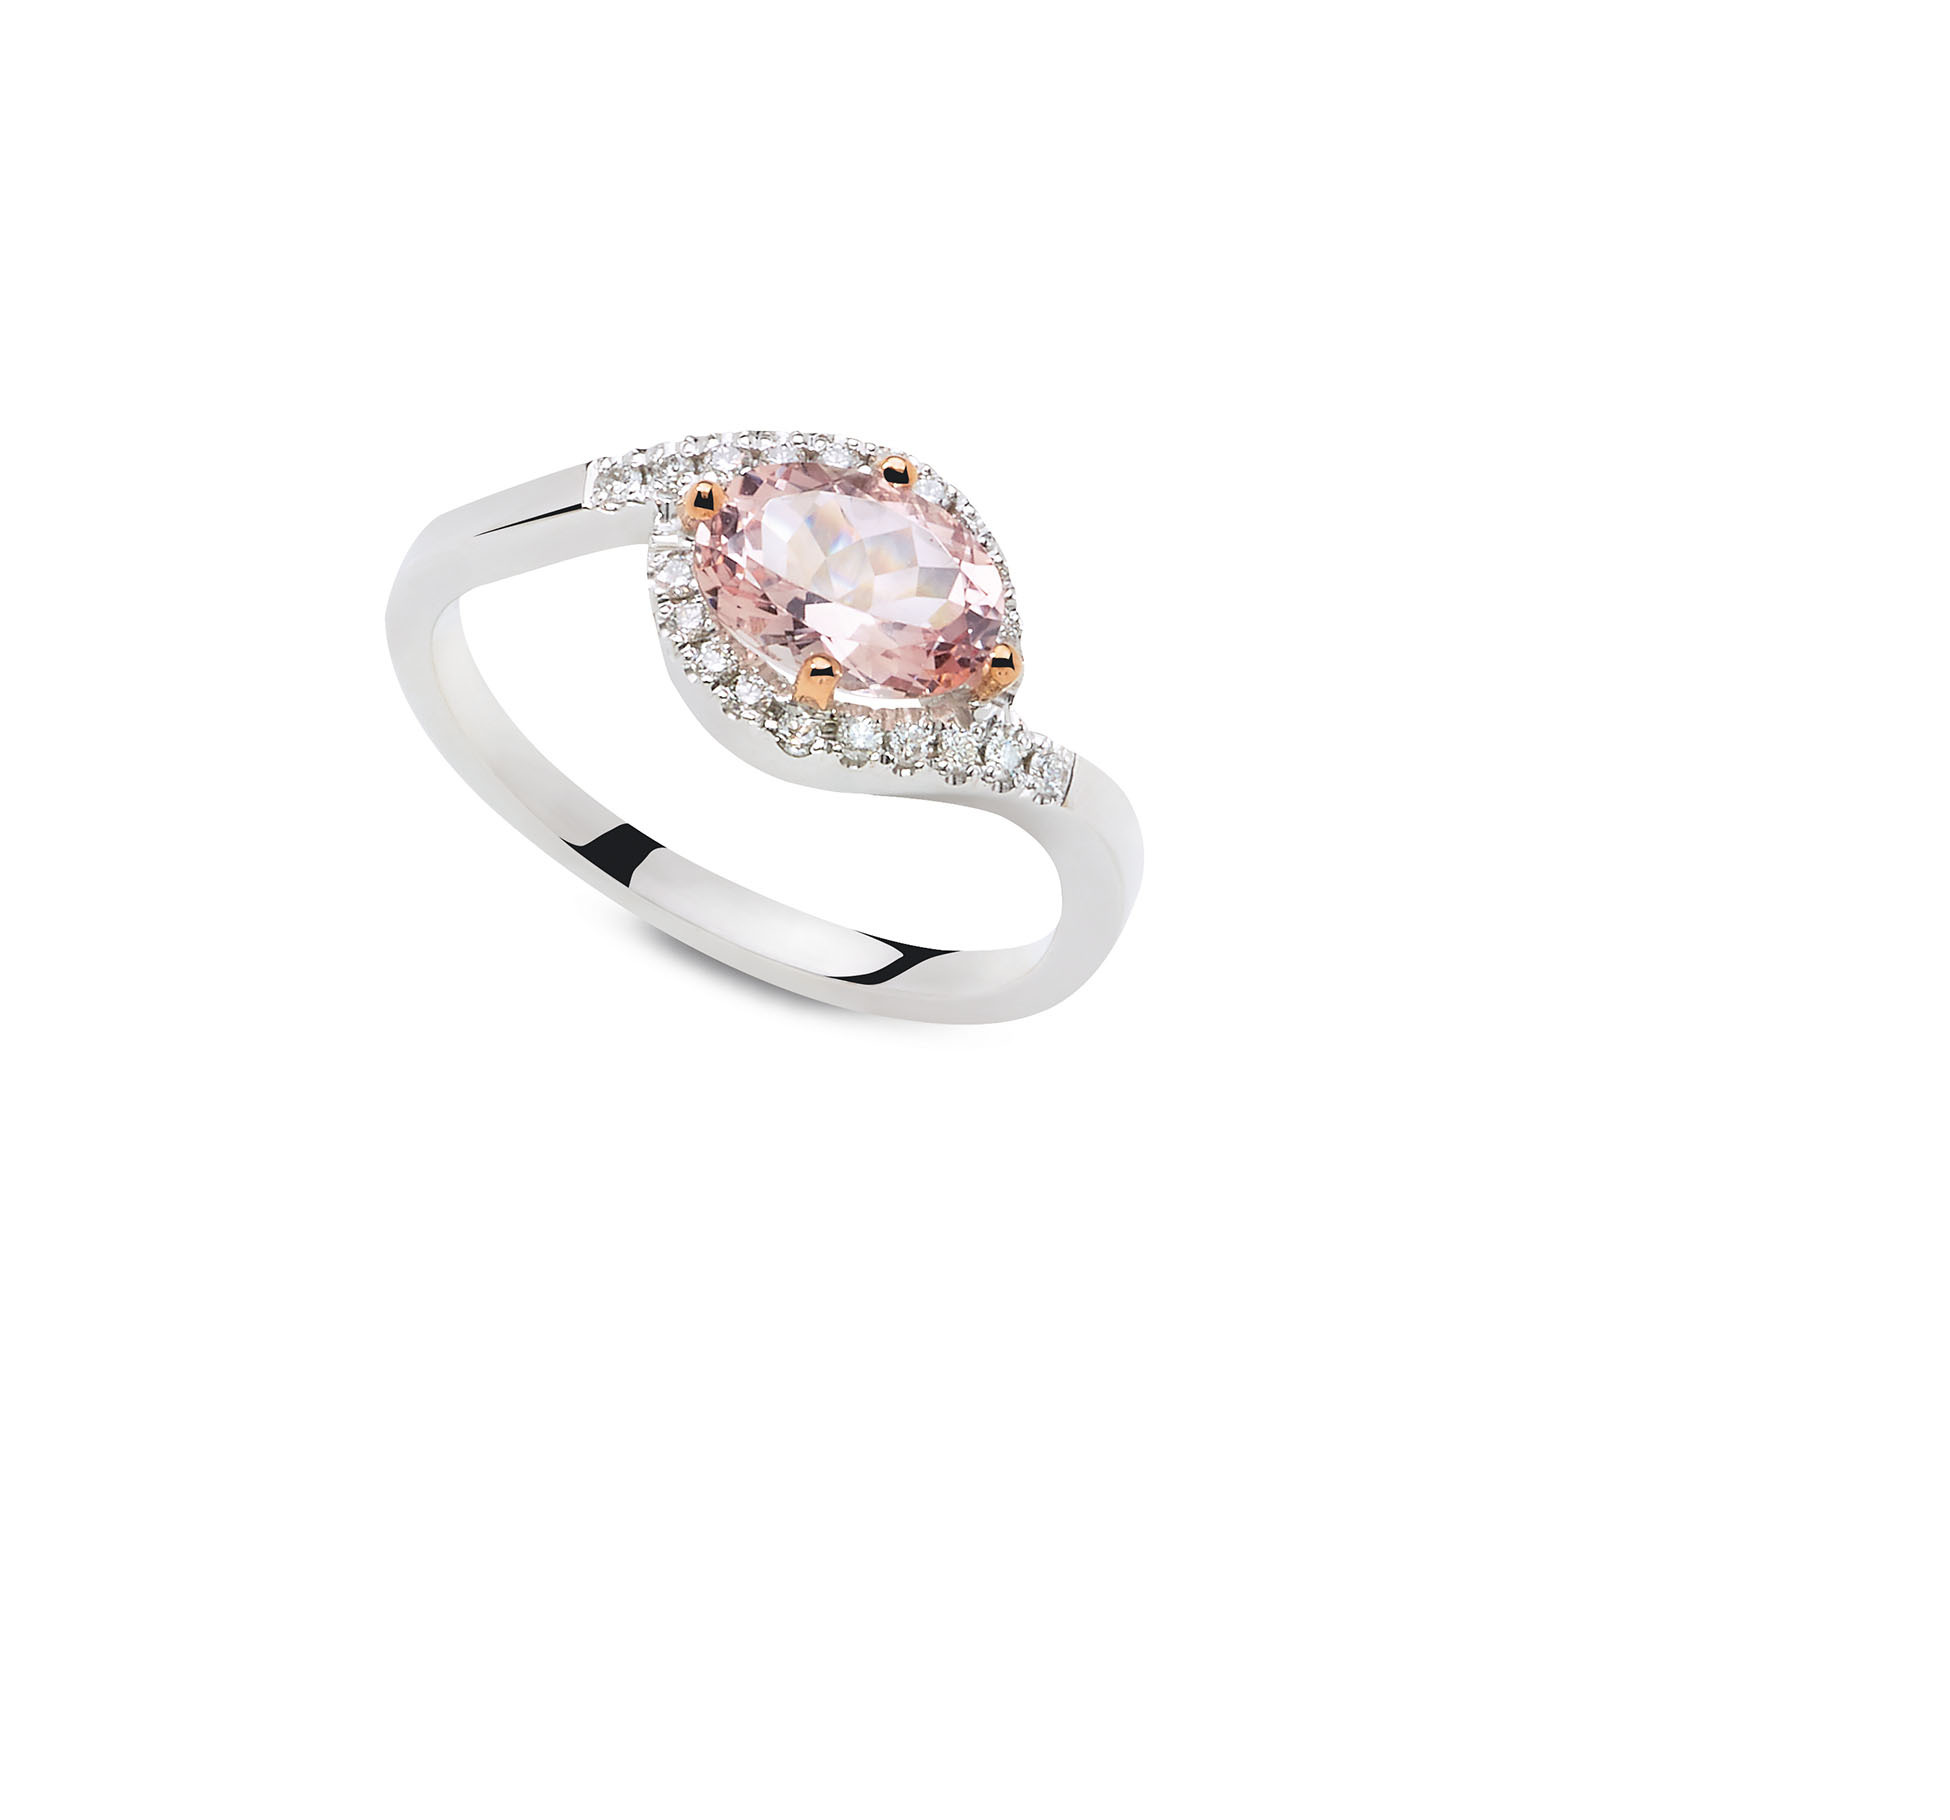 5160rx8w exel collection rings morganite